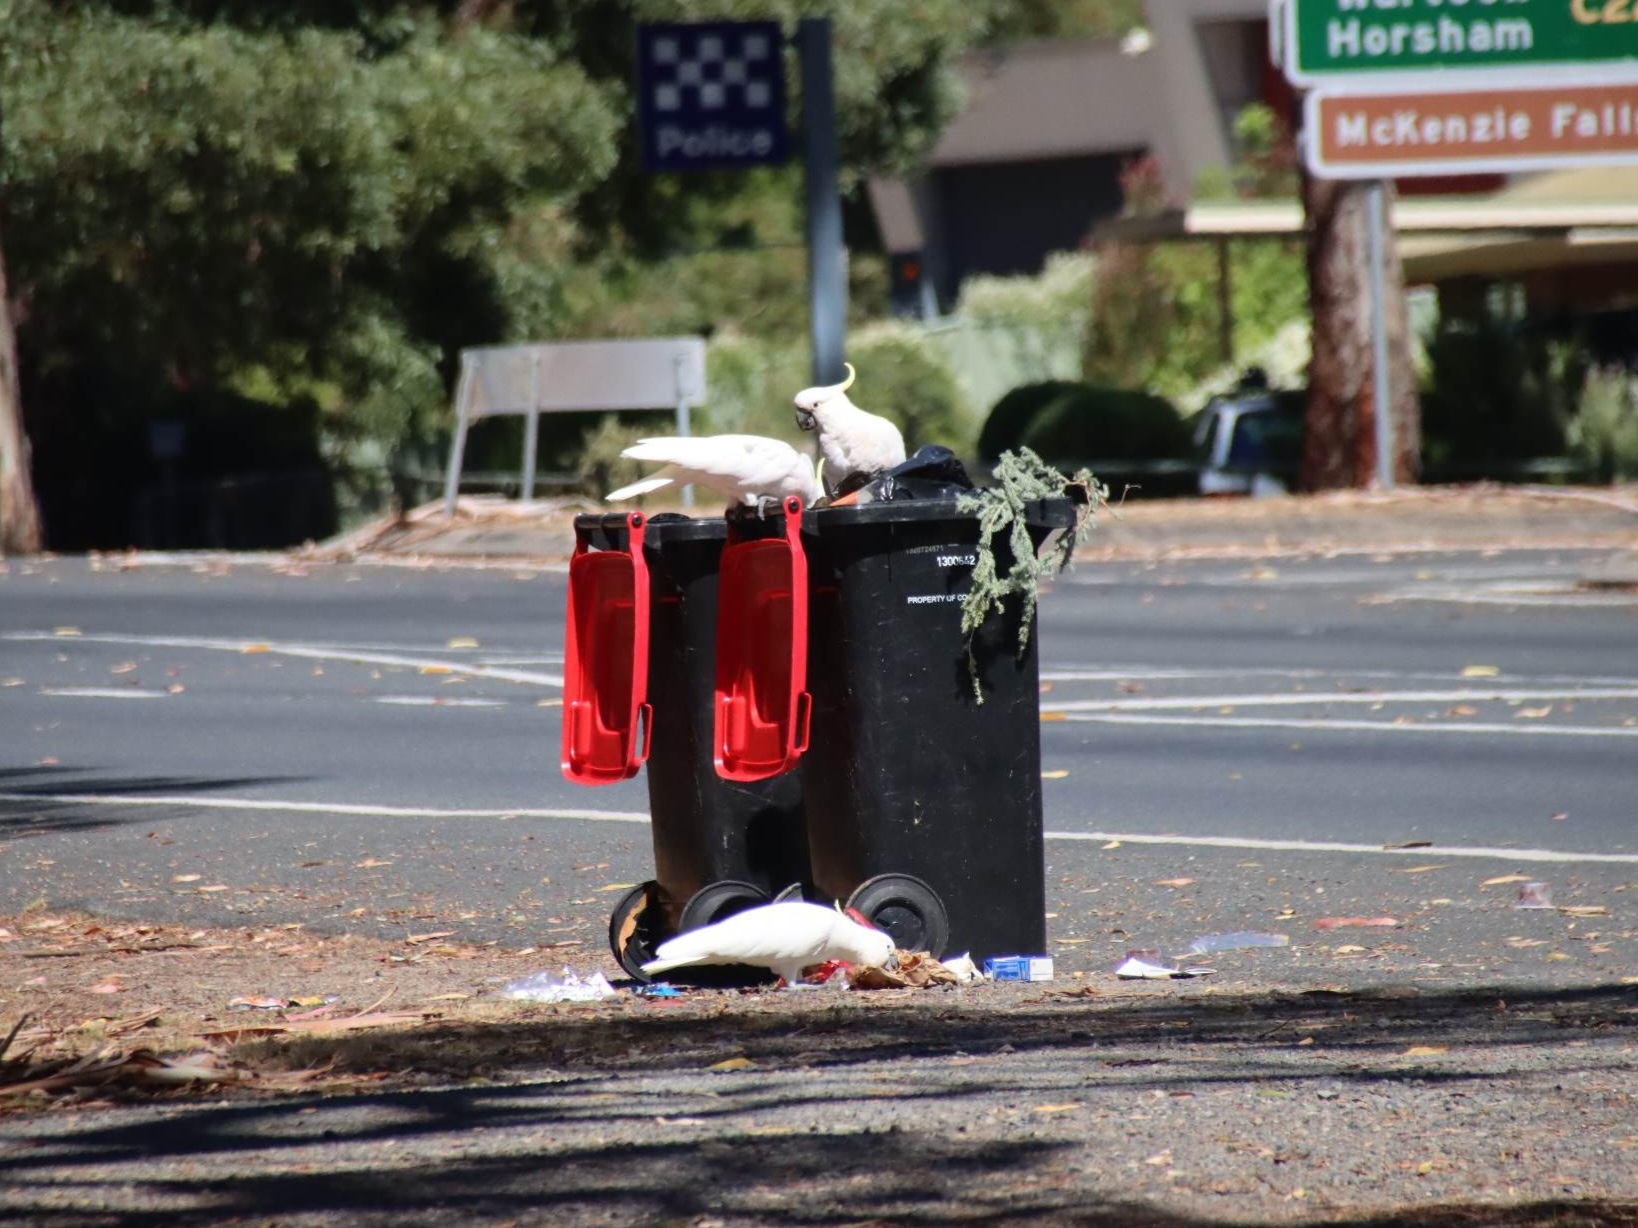 Three Sulphur-crested Cockatoos are rummaging through two black garbage bins with red lids, looking for people-food scraps.